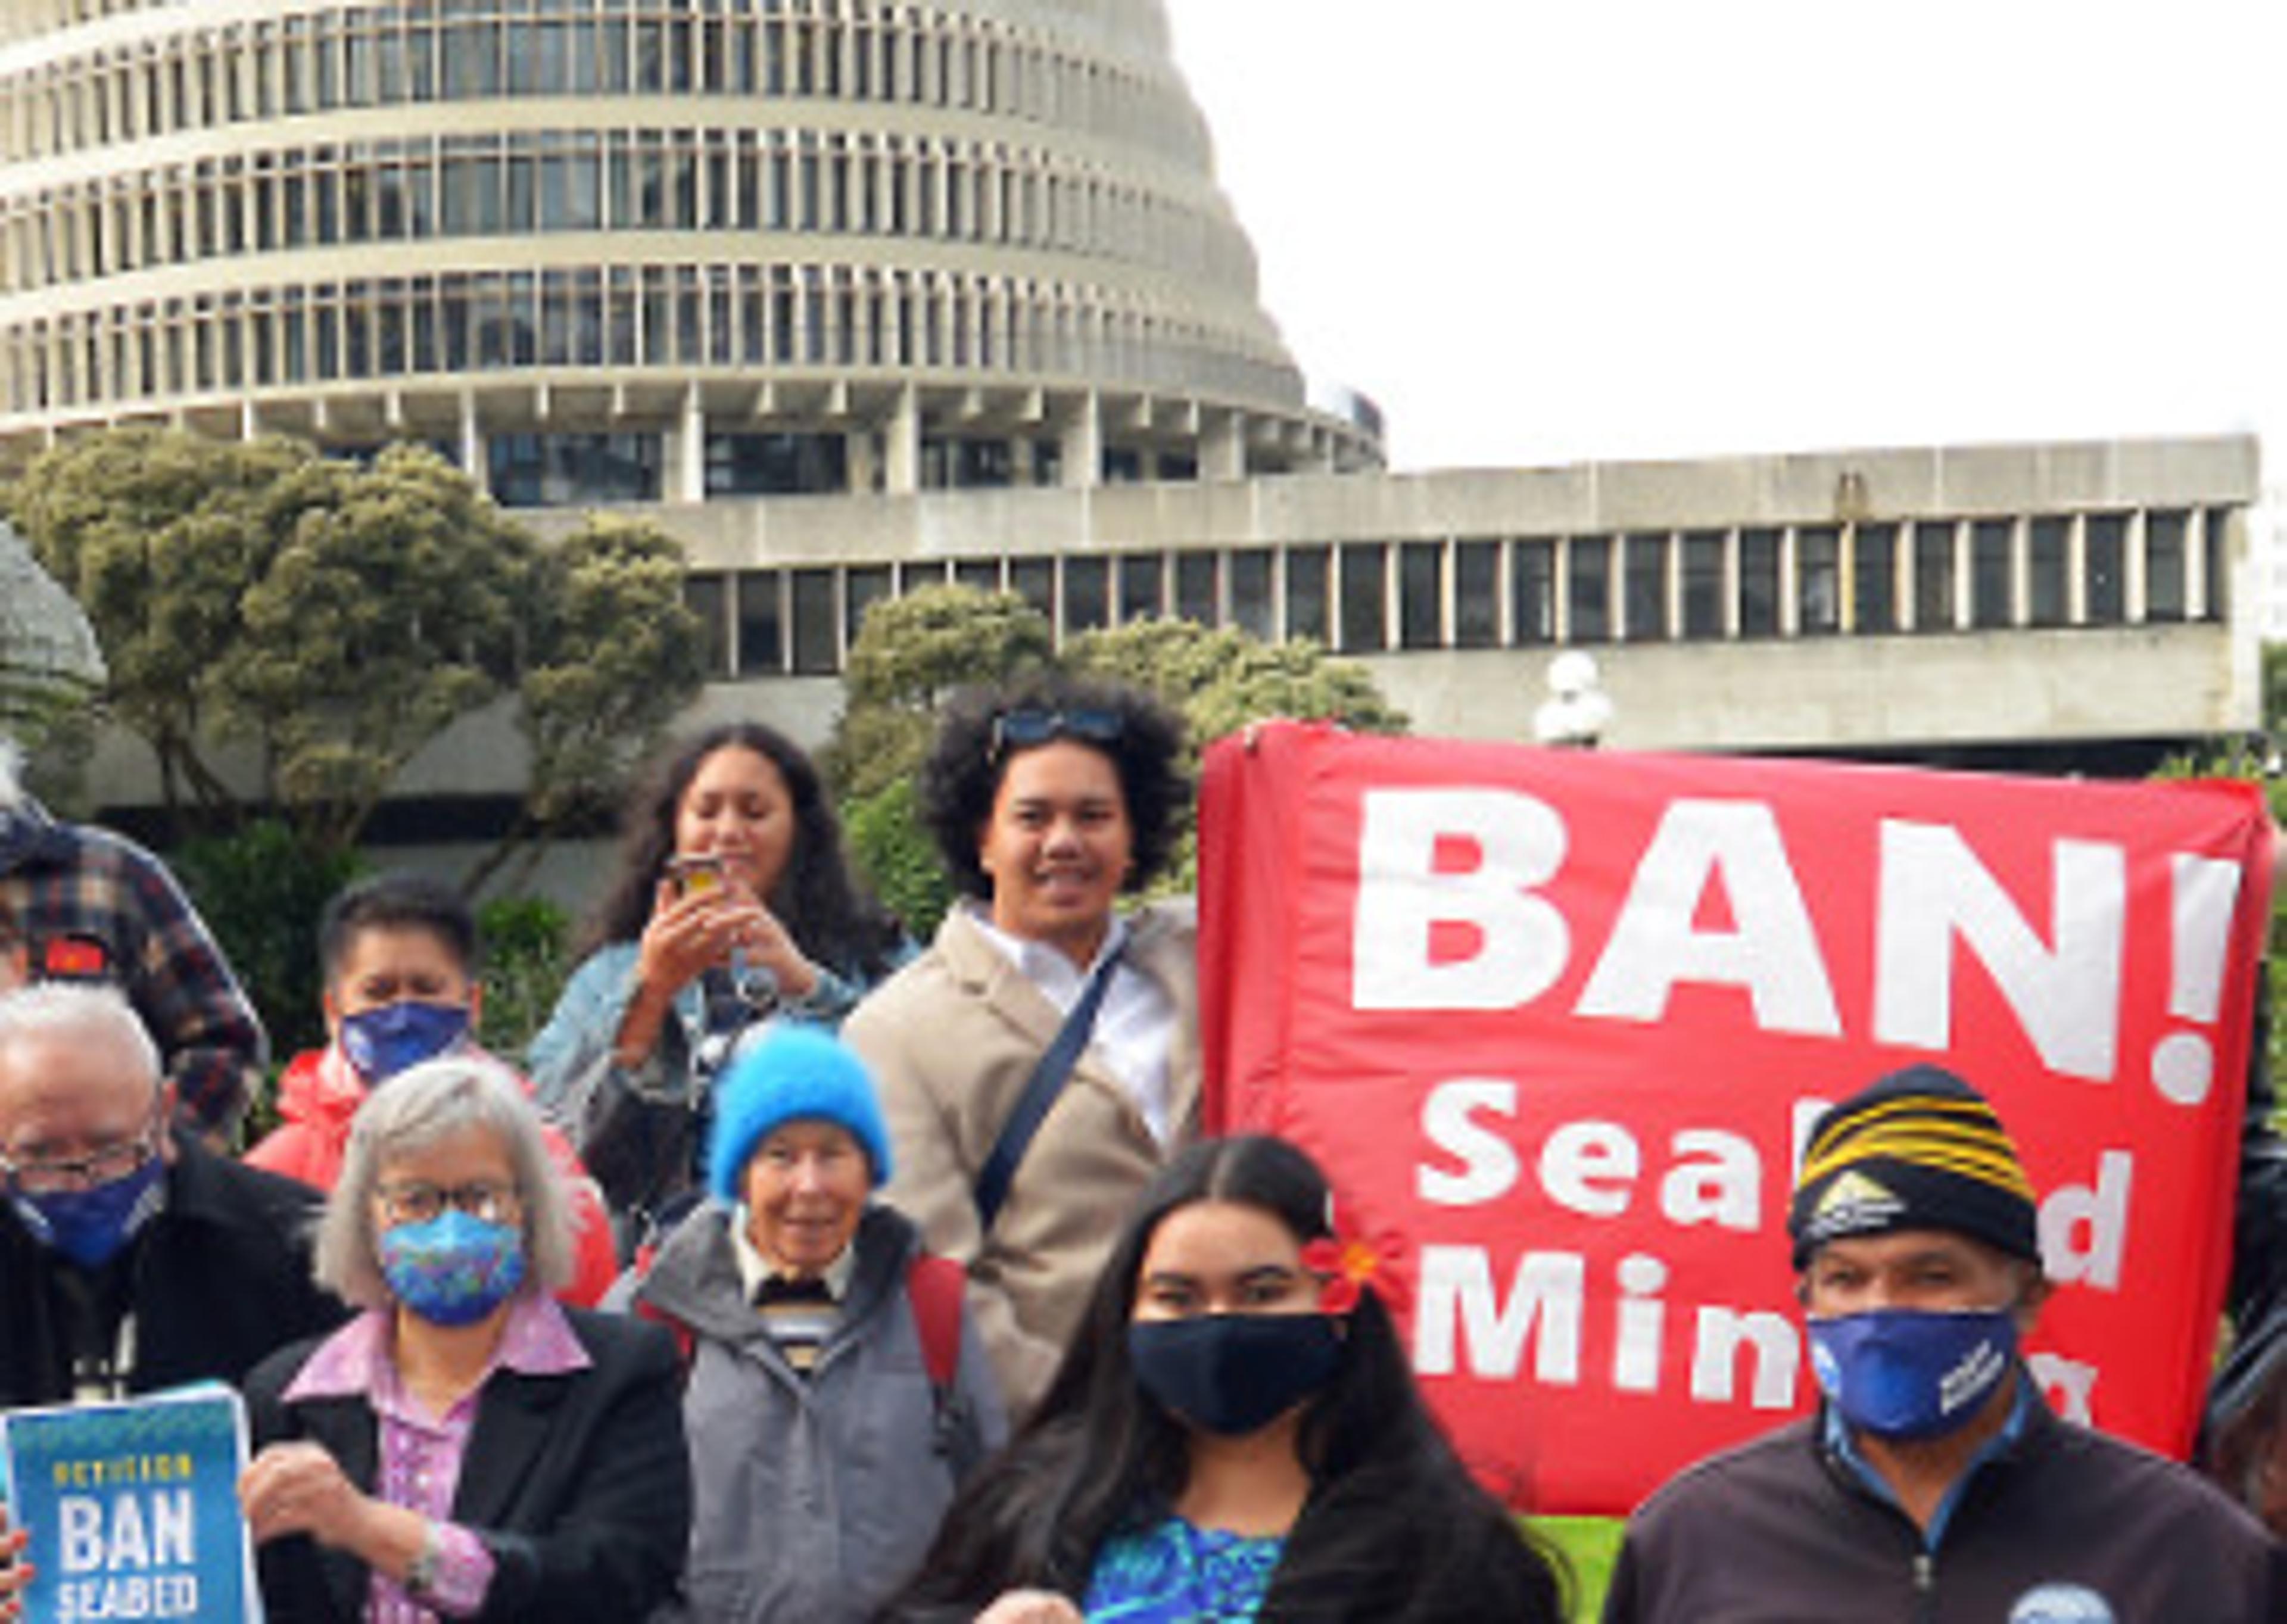 Signatures have been gathered by a raft of environmental groups, including Greenpeace Aotearoa, Kiwis Against Seabed Mining (KASM), and Te Pāti Māori. Ngāti Ruanui, alongside Oceanic Voices